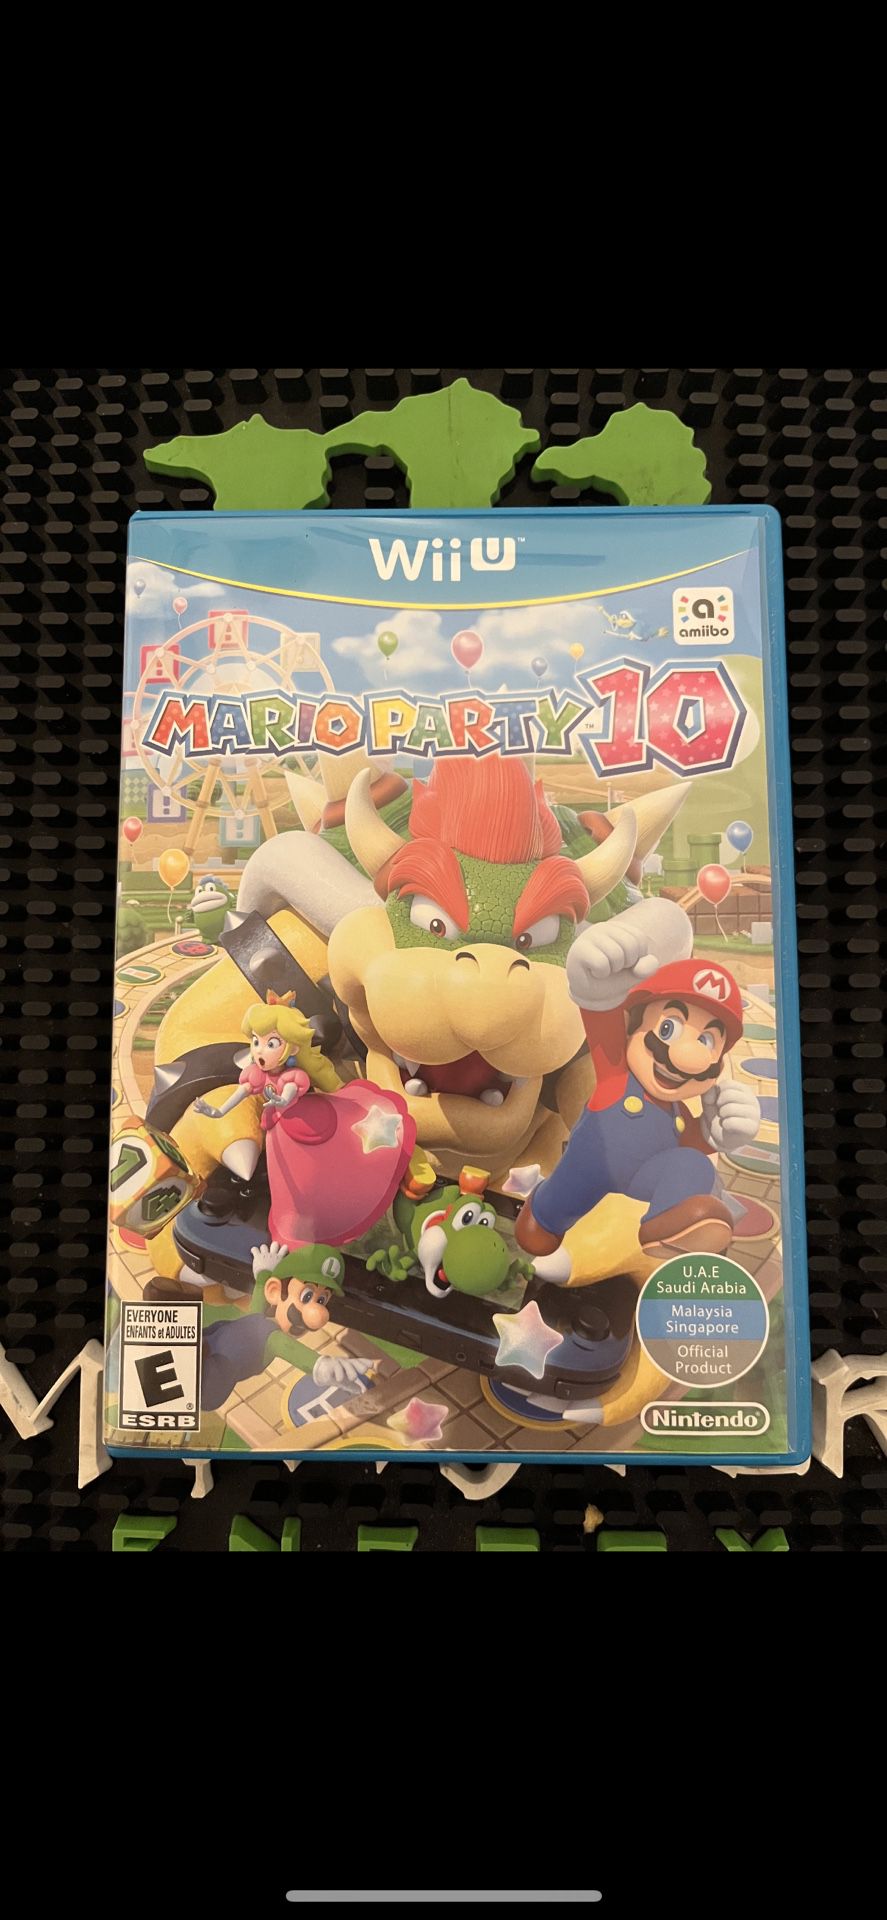 Mario Party 10 Wii Game Disk $20 Firm